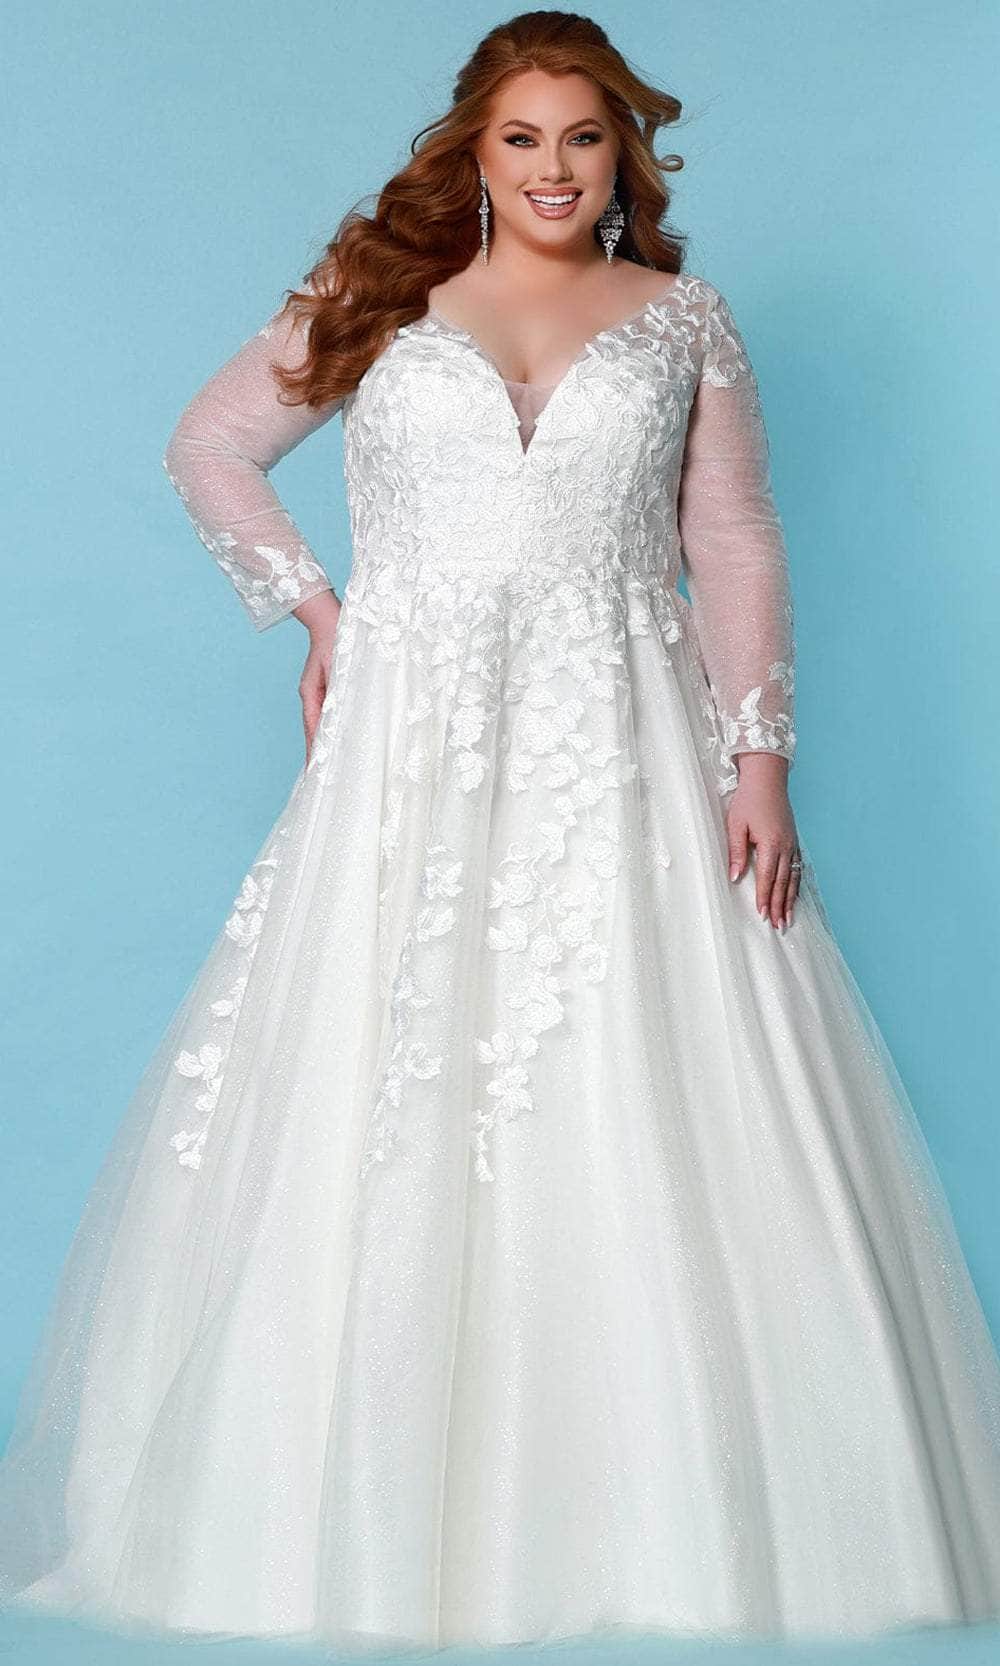 Image of Sydney's Closet Bridal - SC5267 Embroidered Glitter Bridal Gown